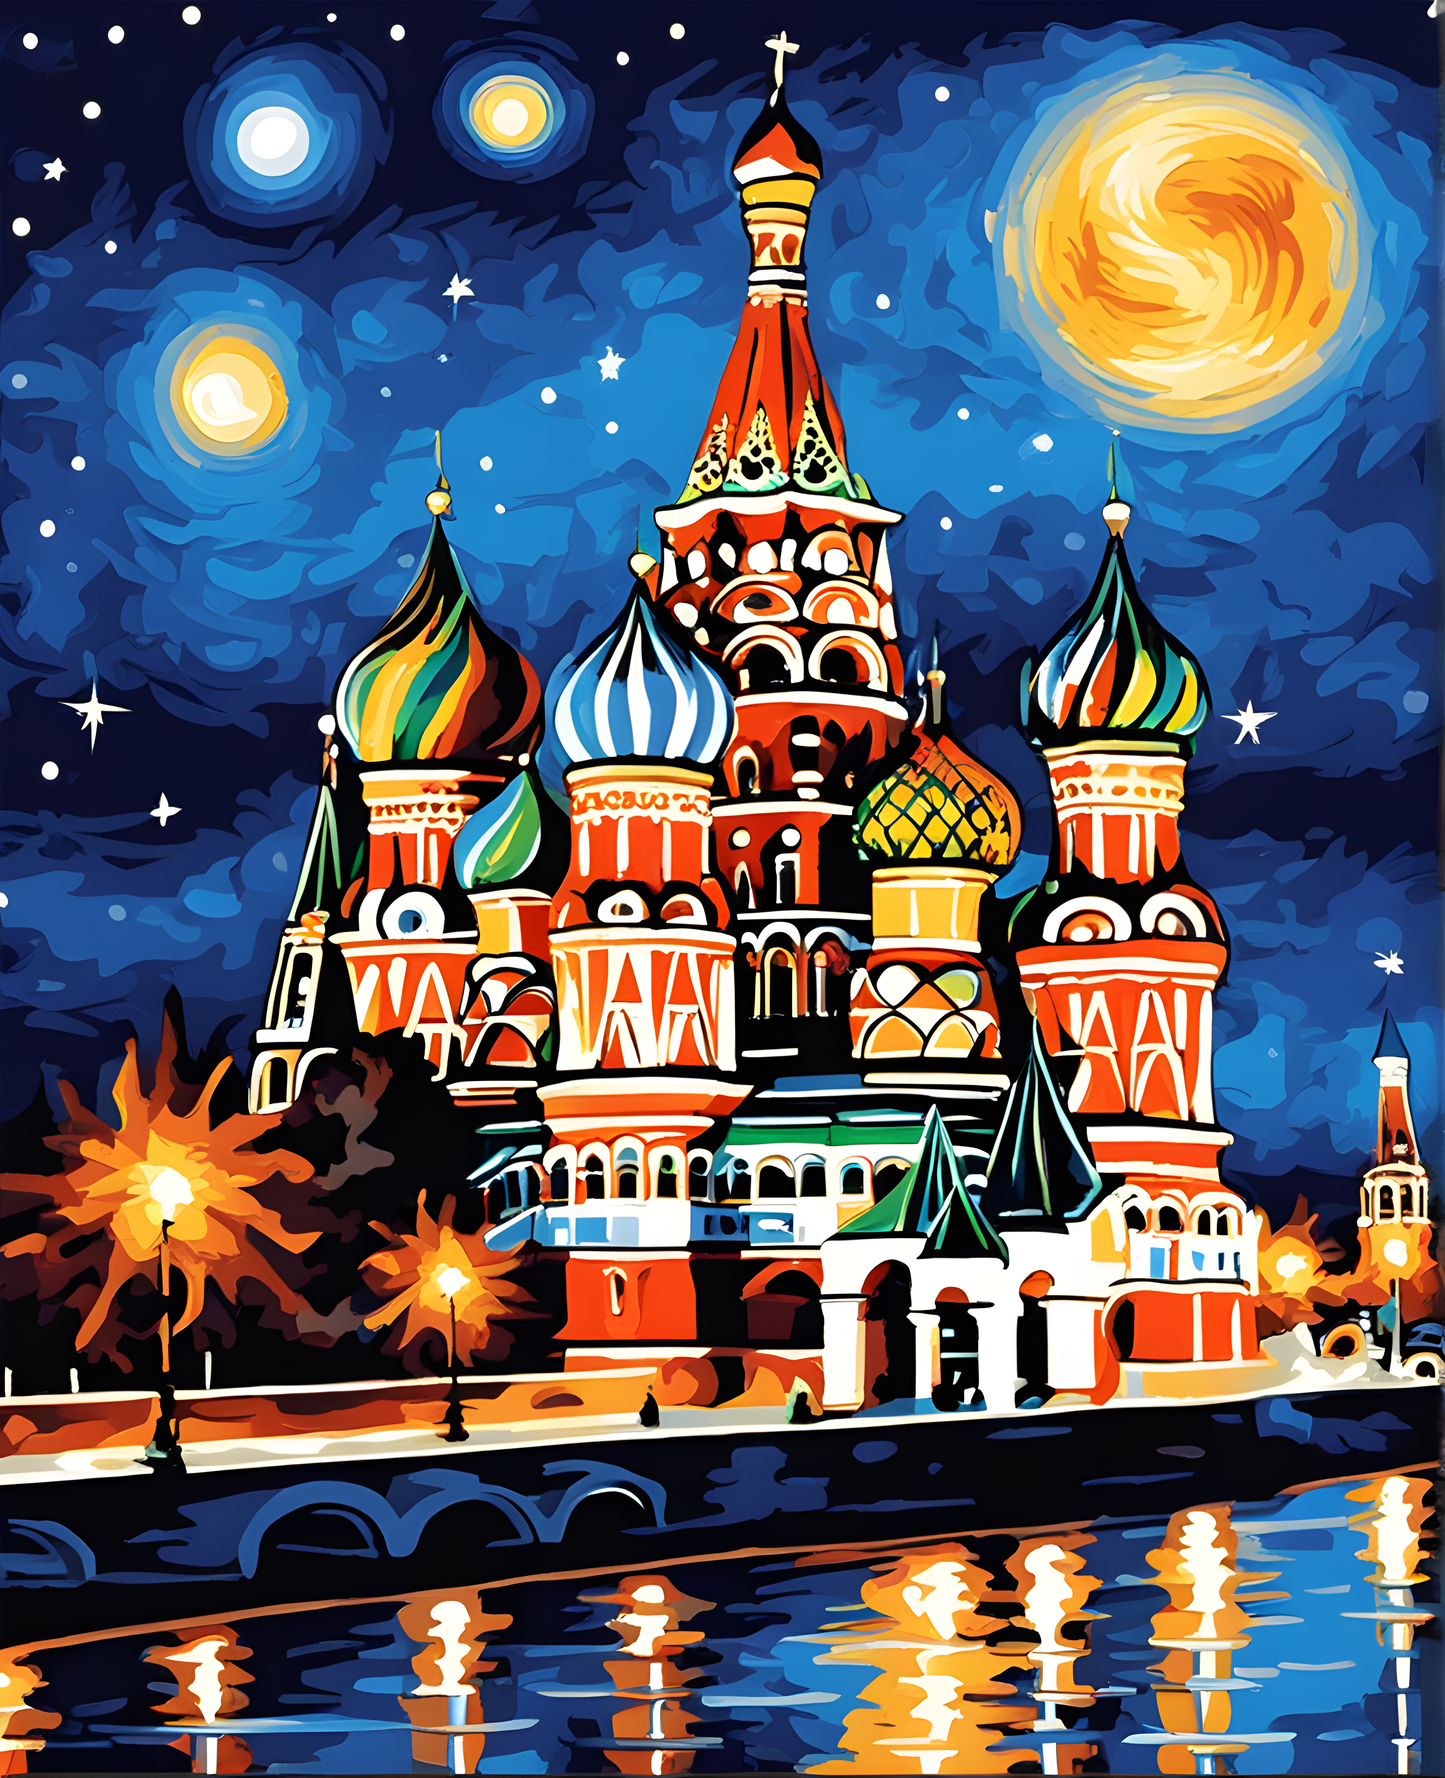 Moscow Saint Basil's Cathedral (8) - at Starry Night -  Van-Go Paint-By-Number Kit